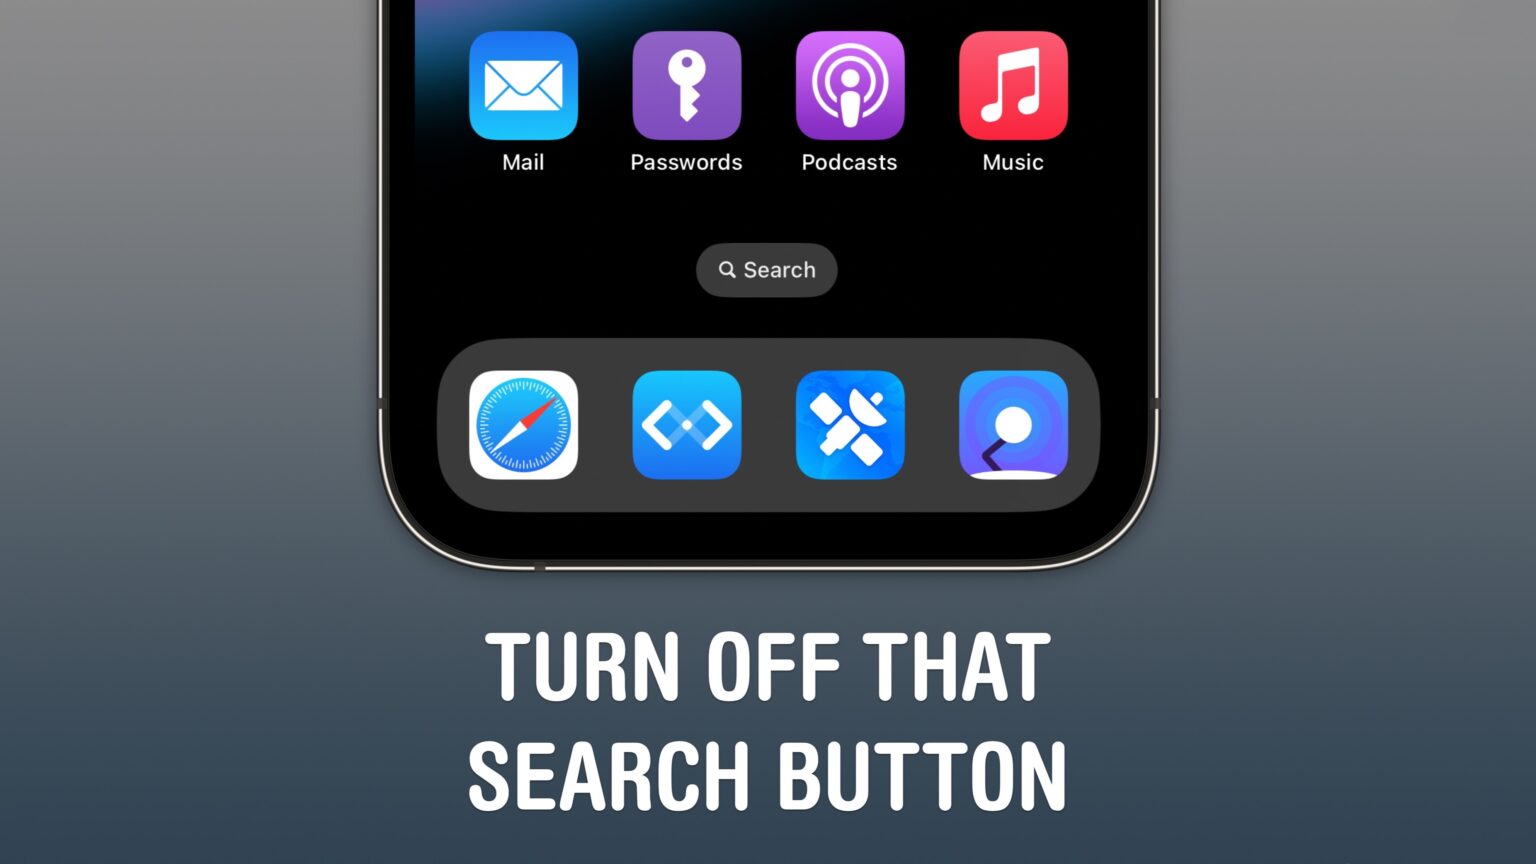 Turn off that Search button on the Home Screen.